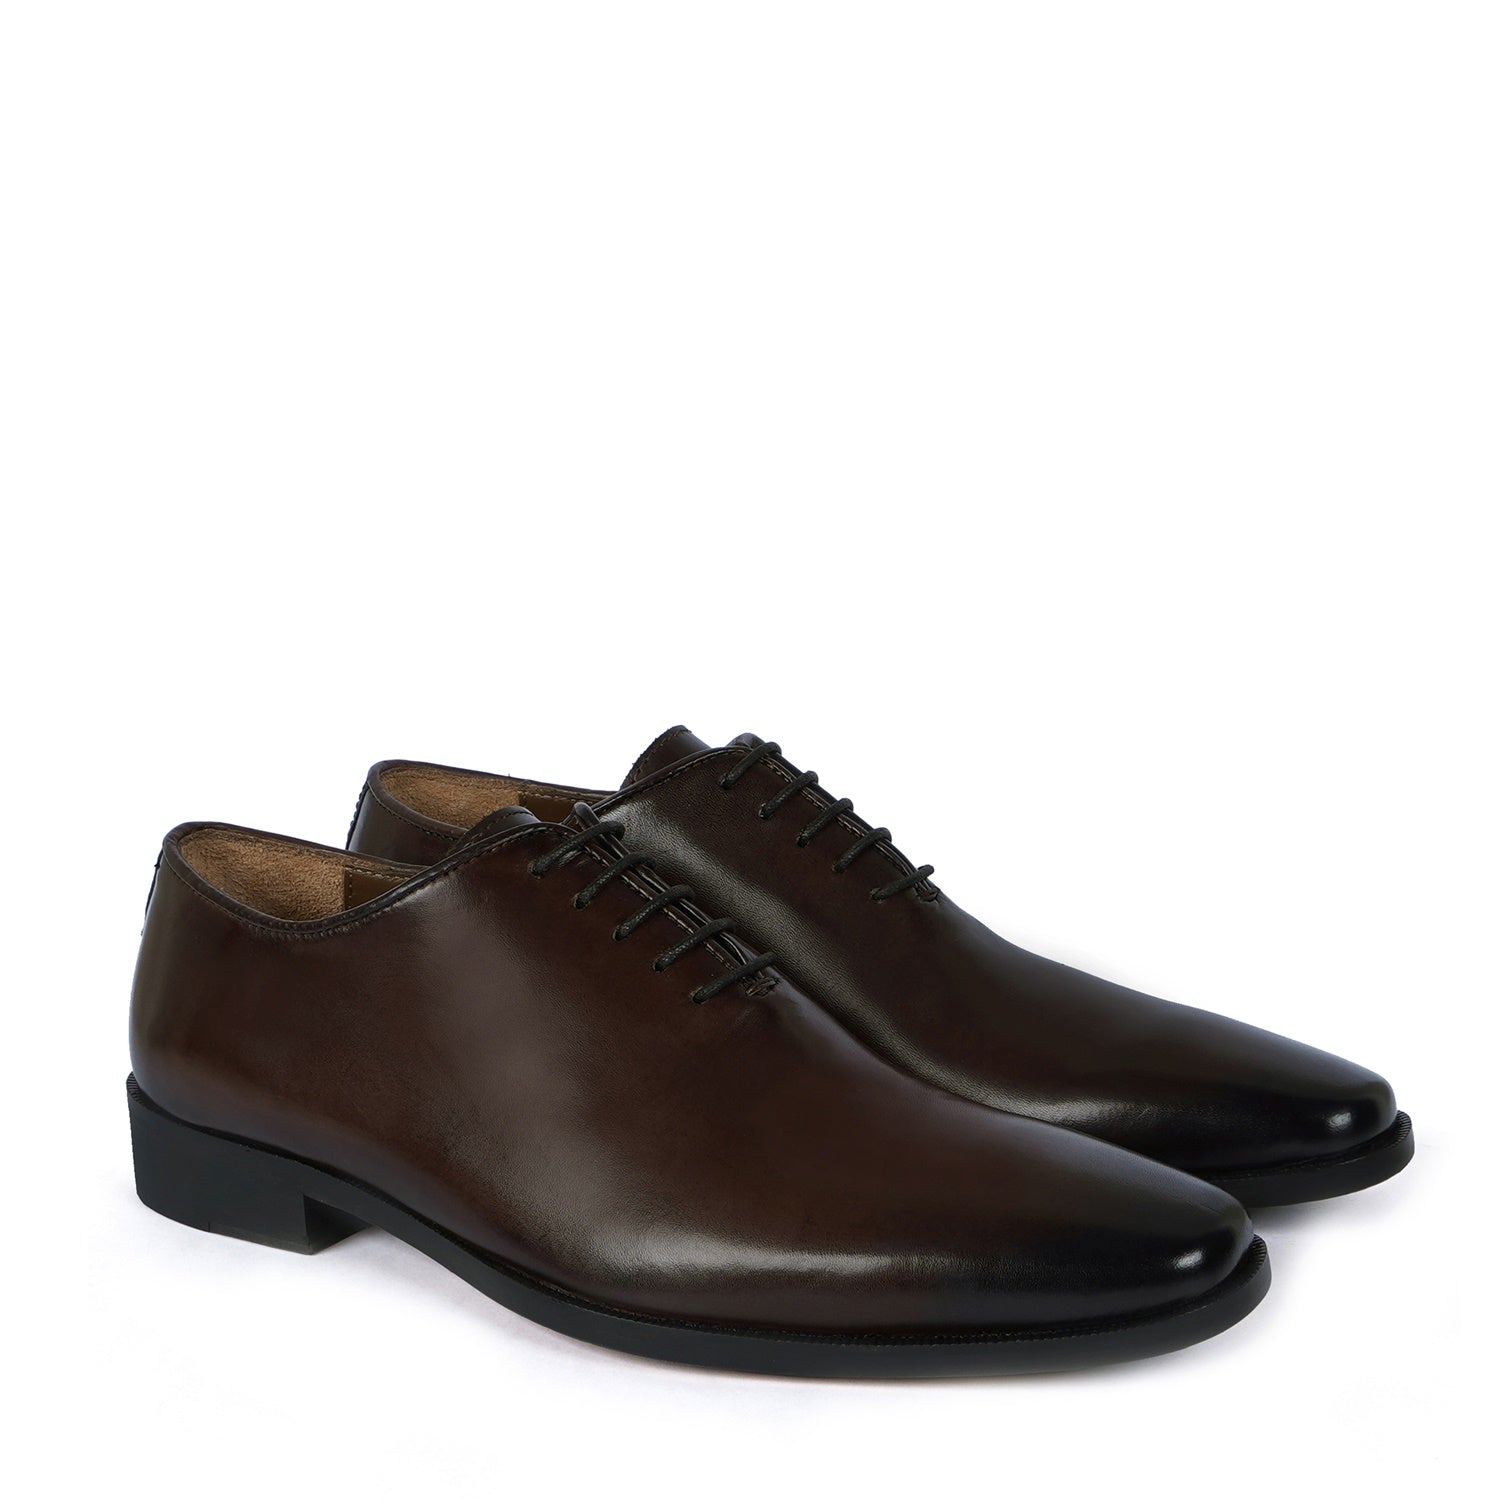 Whole Cut/One-Piece Dark Brown Long Tail Leather Oxford Formal Shoes By Brune & Bareskin